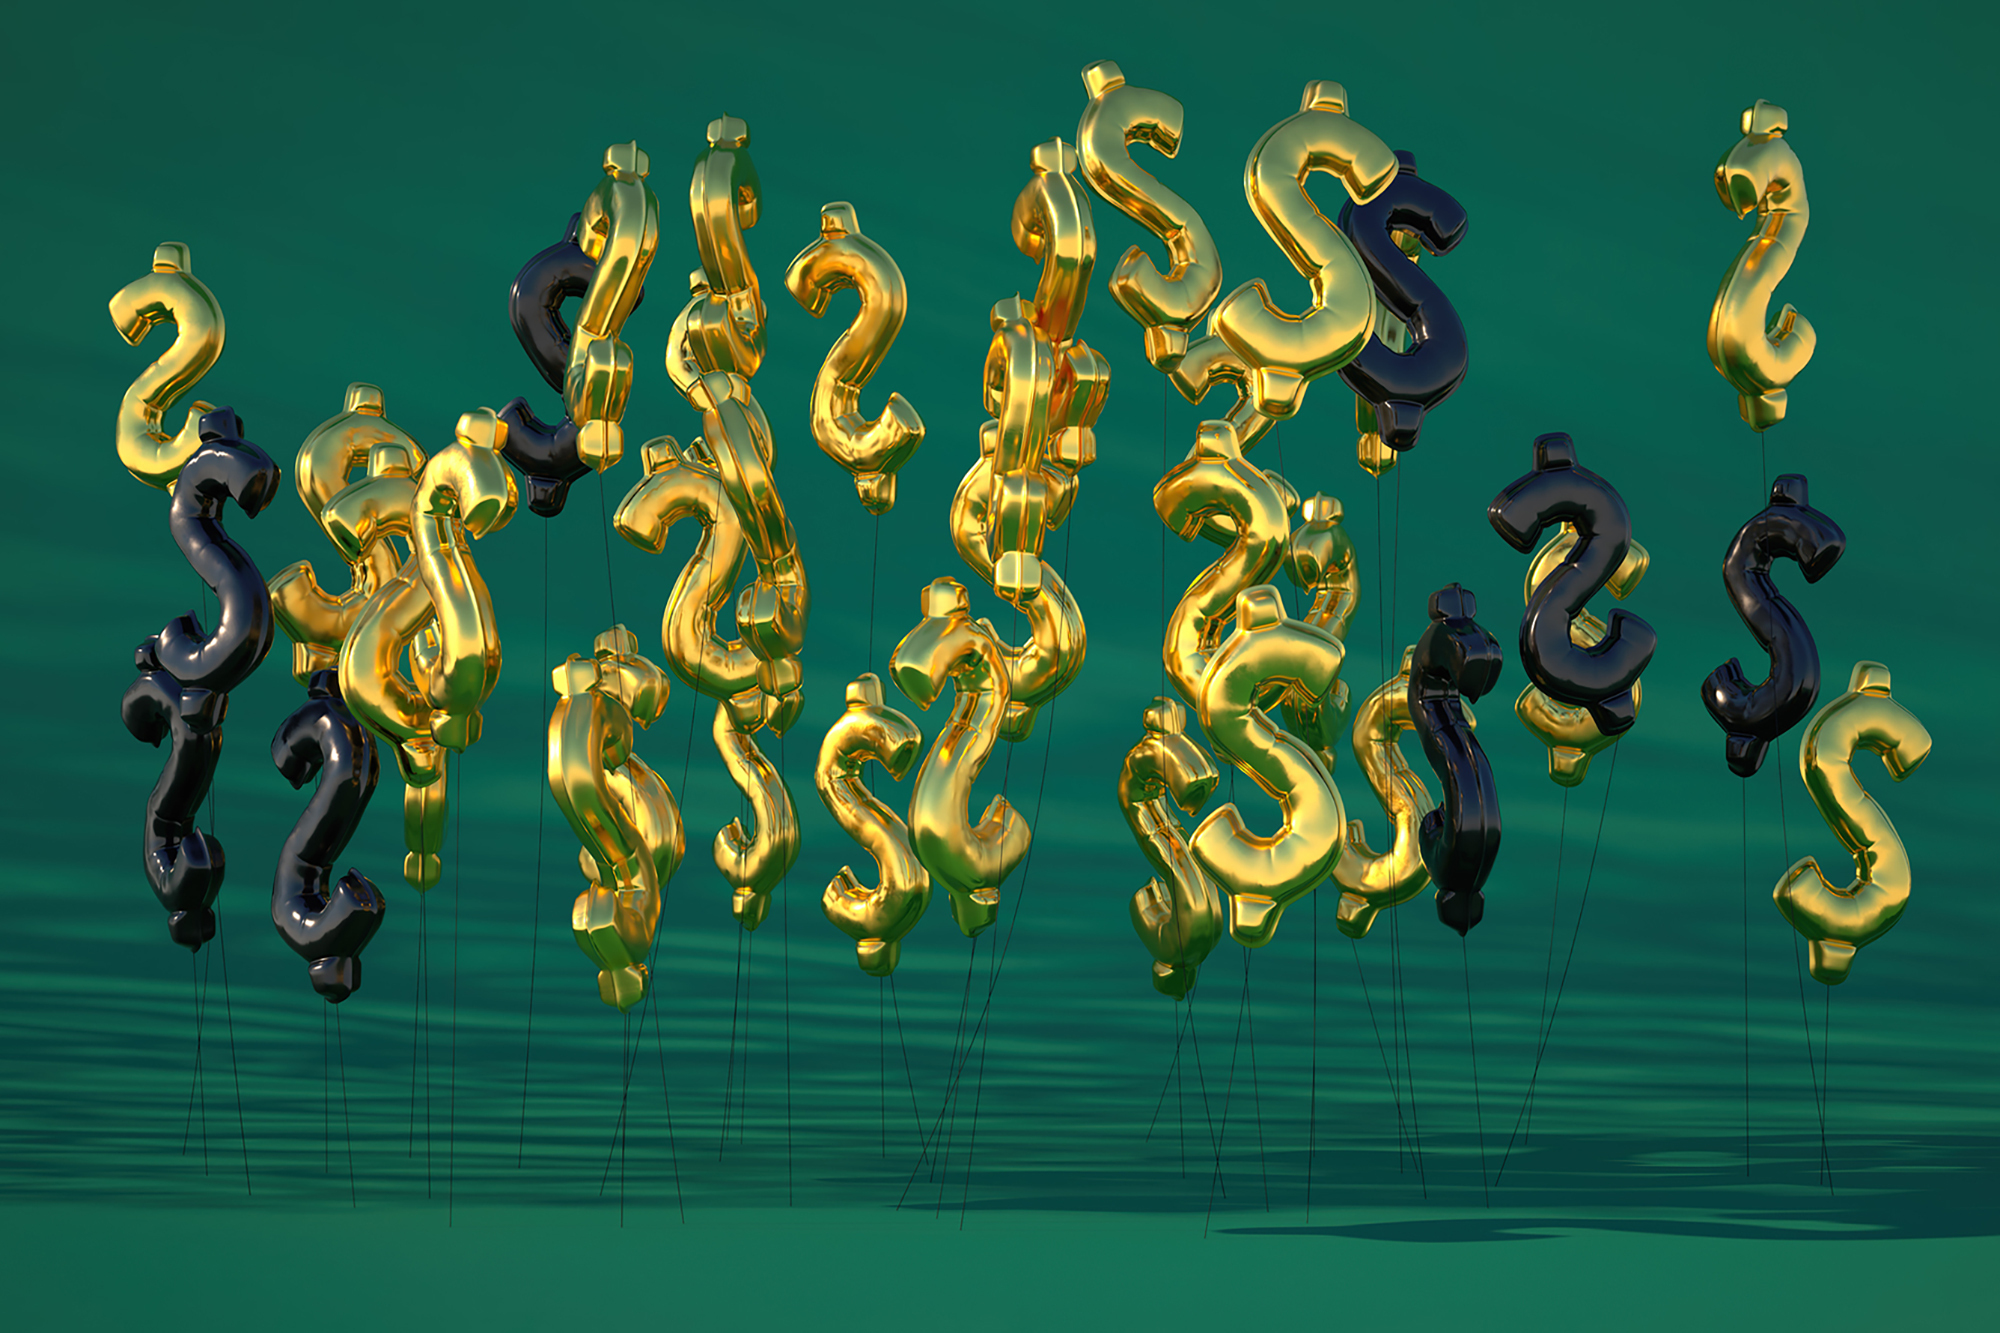 Image of dollar signs in gold and black colors with green background.